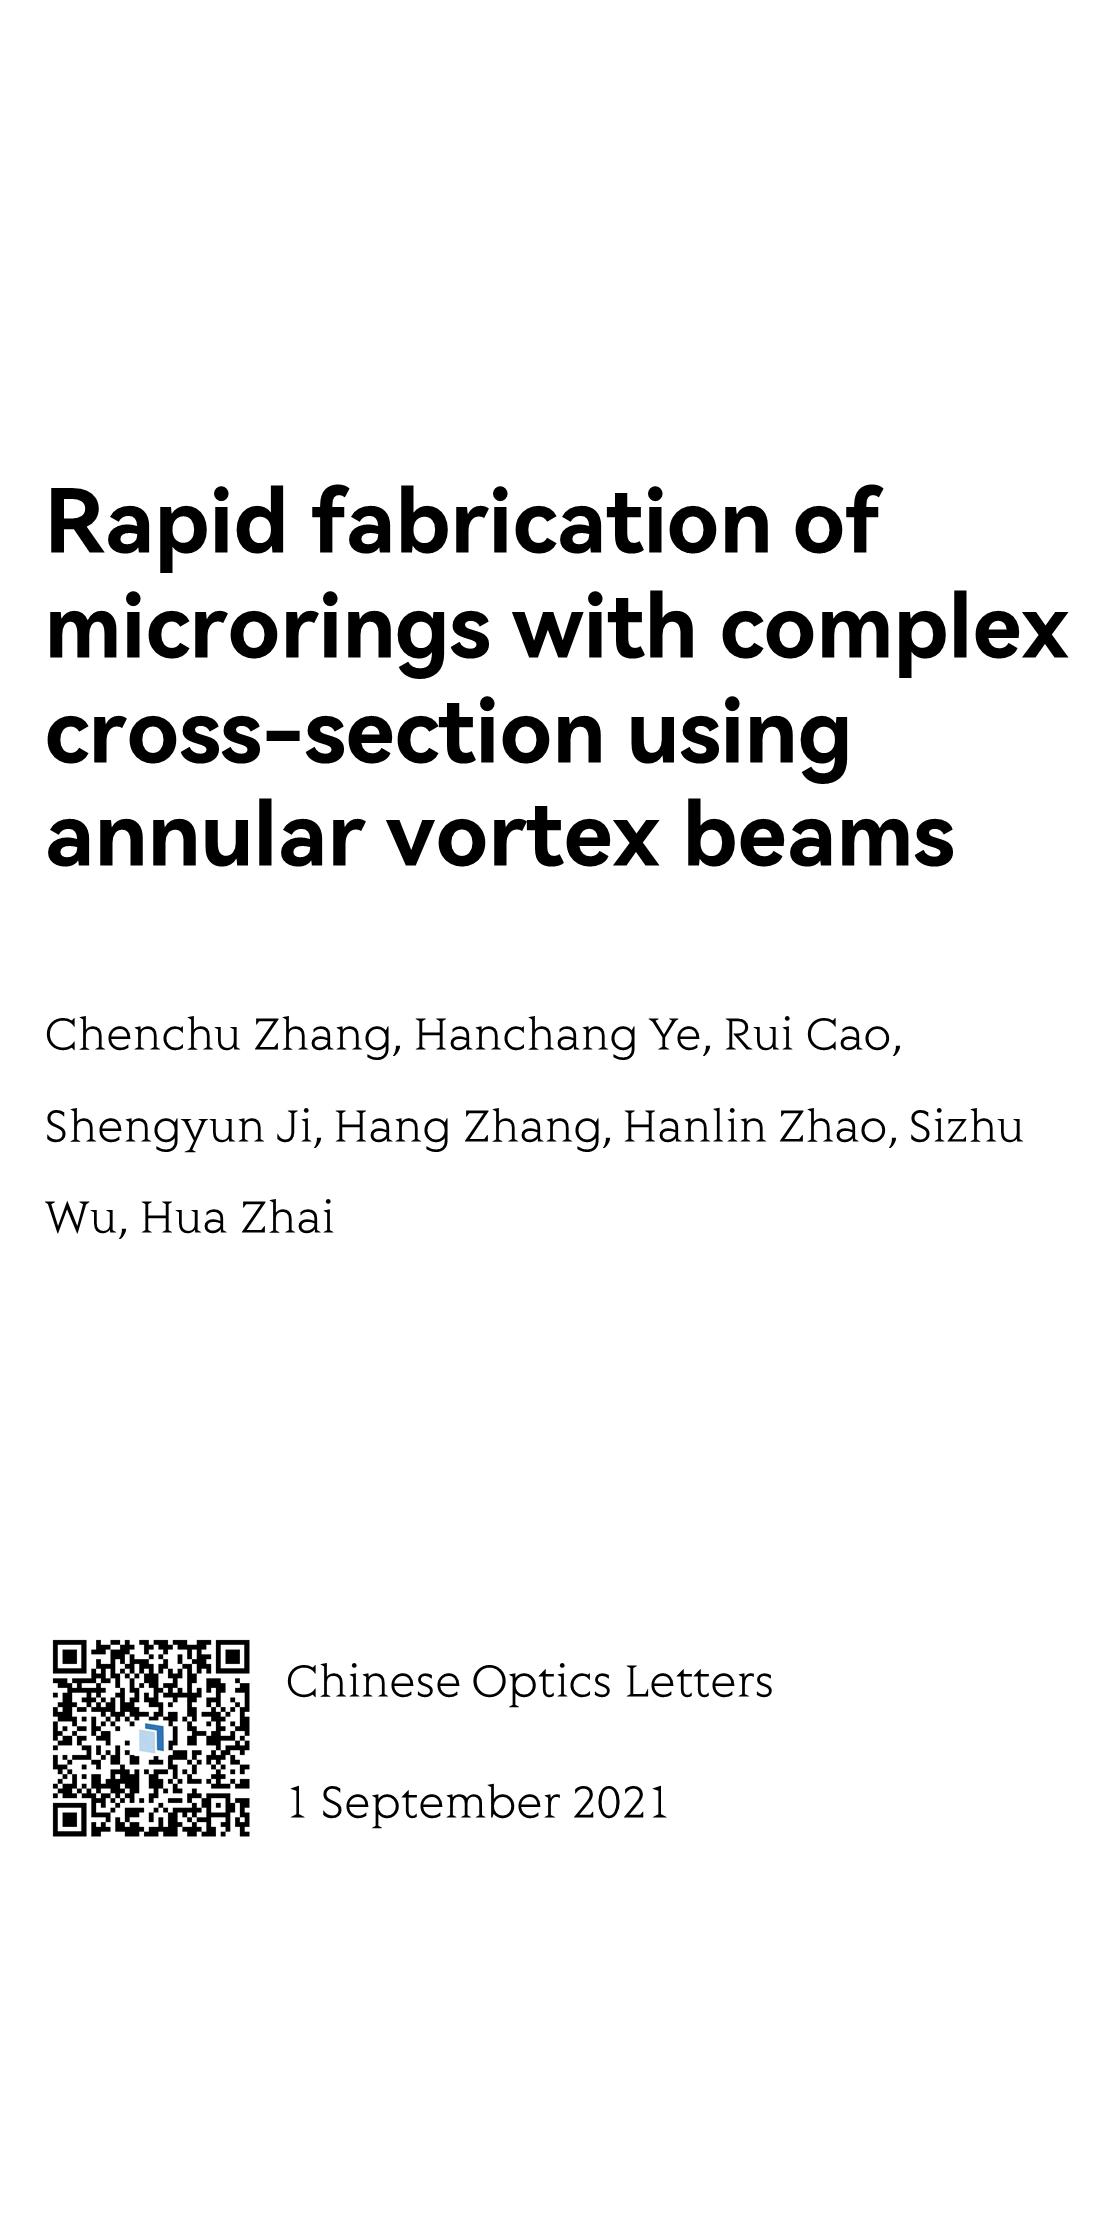 Rapid fabrication of microrings with complex cross-section using annular vortex beams_1